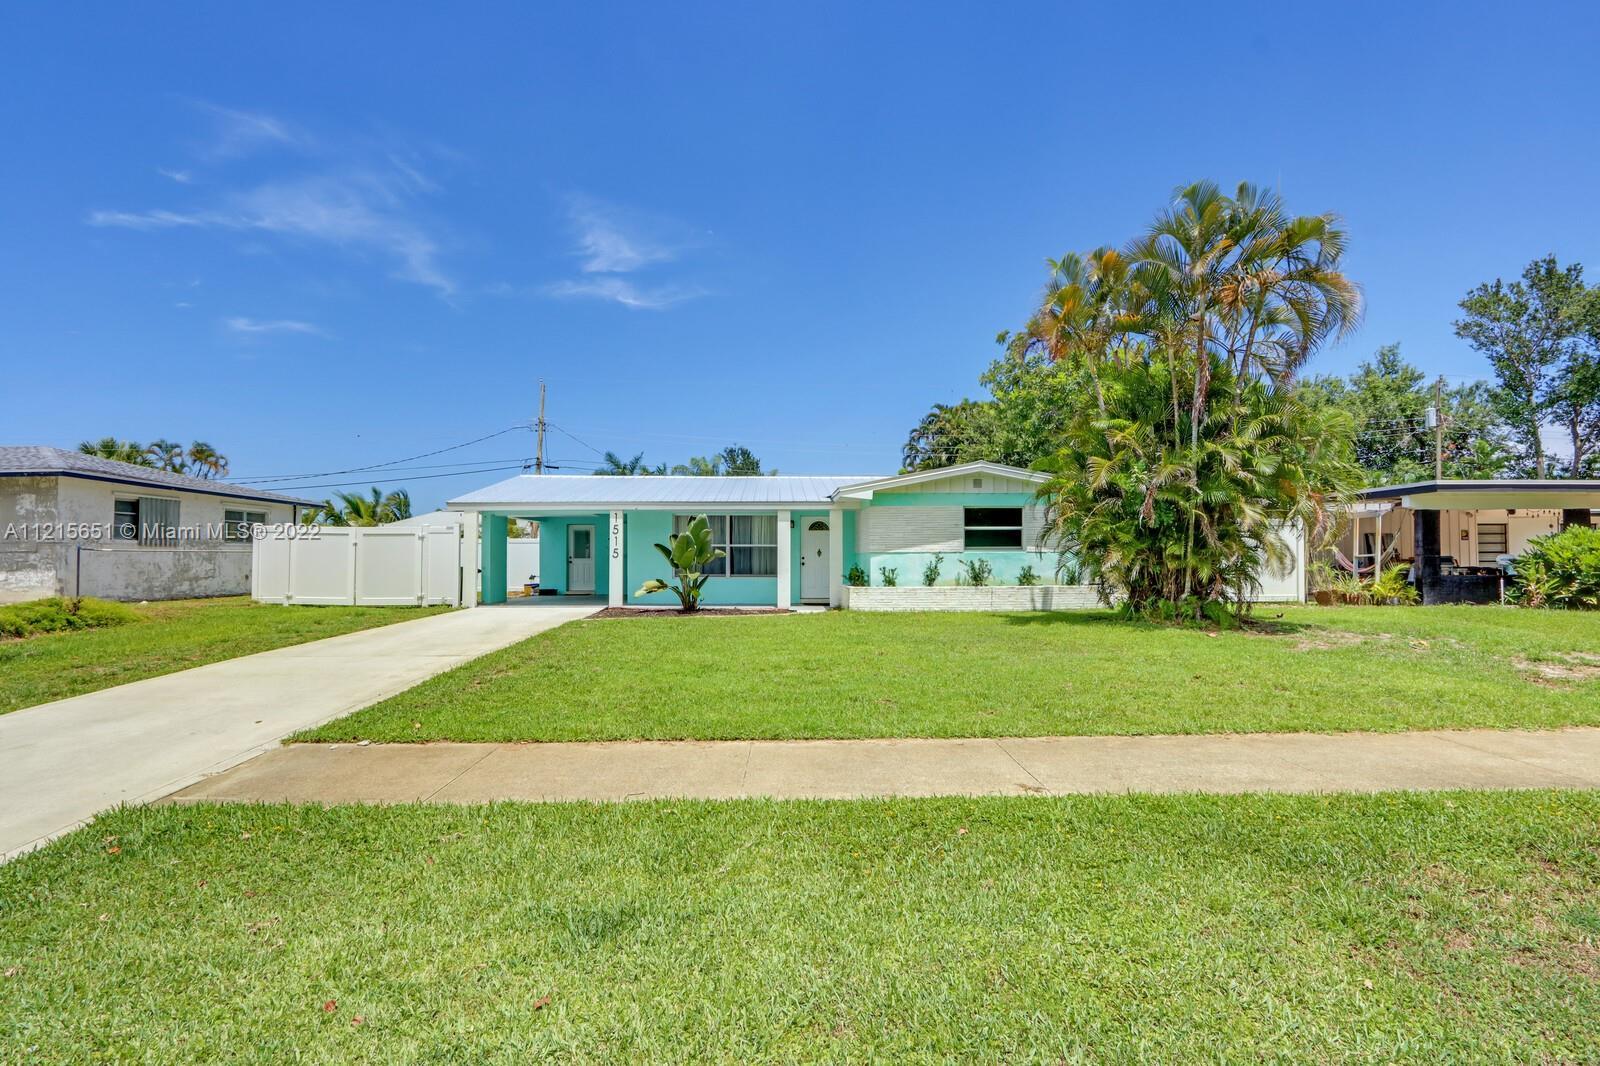 This darling 2 bedroom, 2 bath, remodeled home, in one of the most coveted neighborhoods in Tequesta